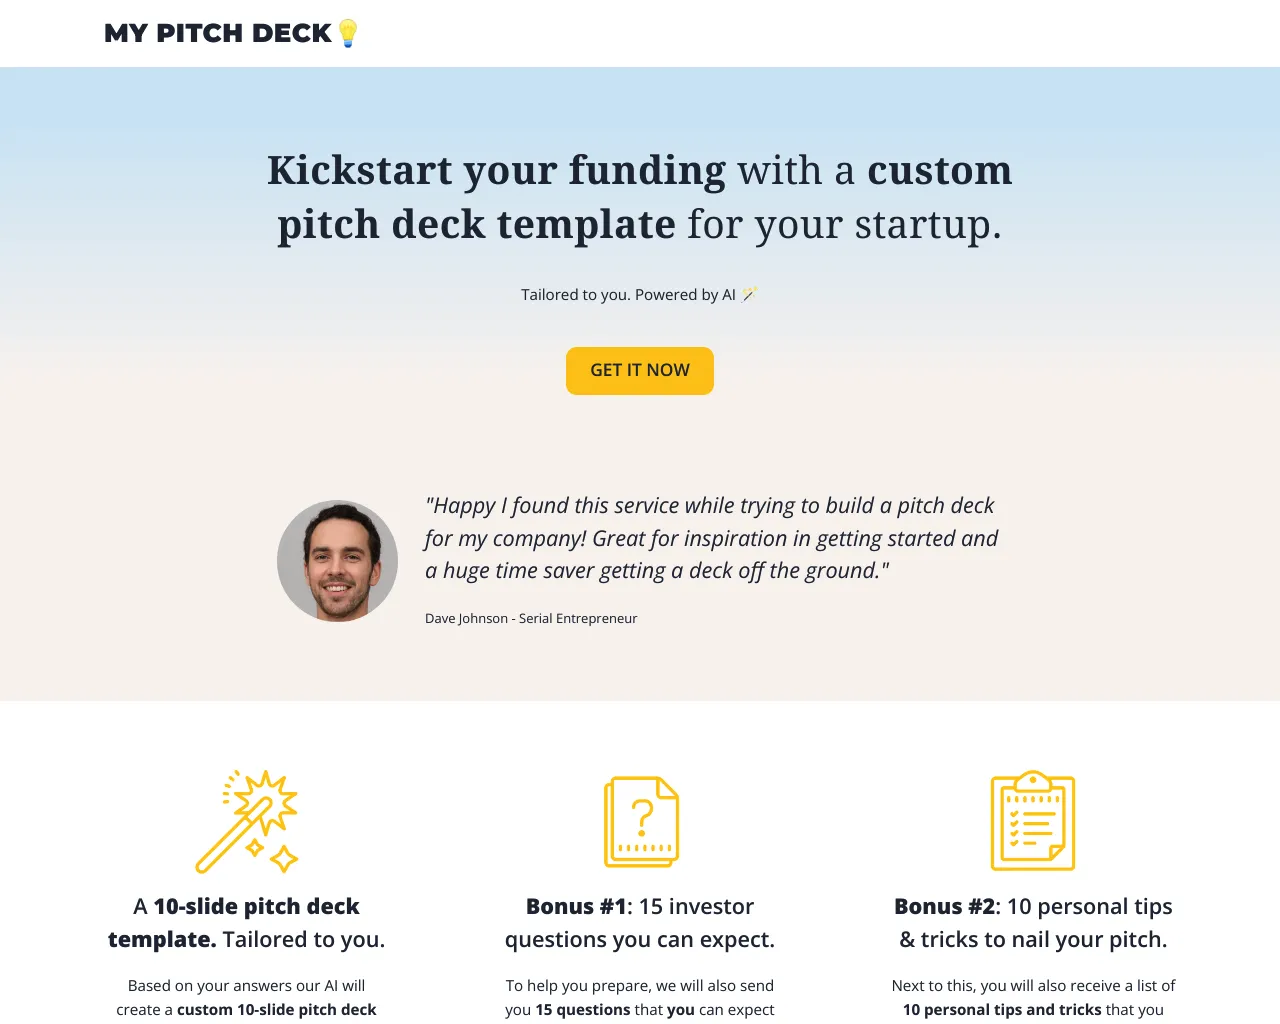 My Pitch Deck - Kickstart your funding with a custom pitch deck template